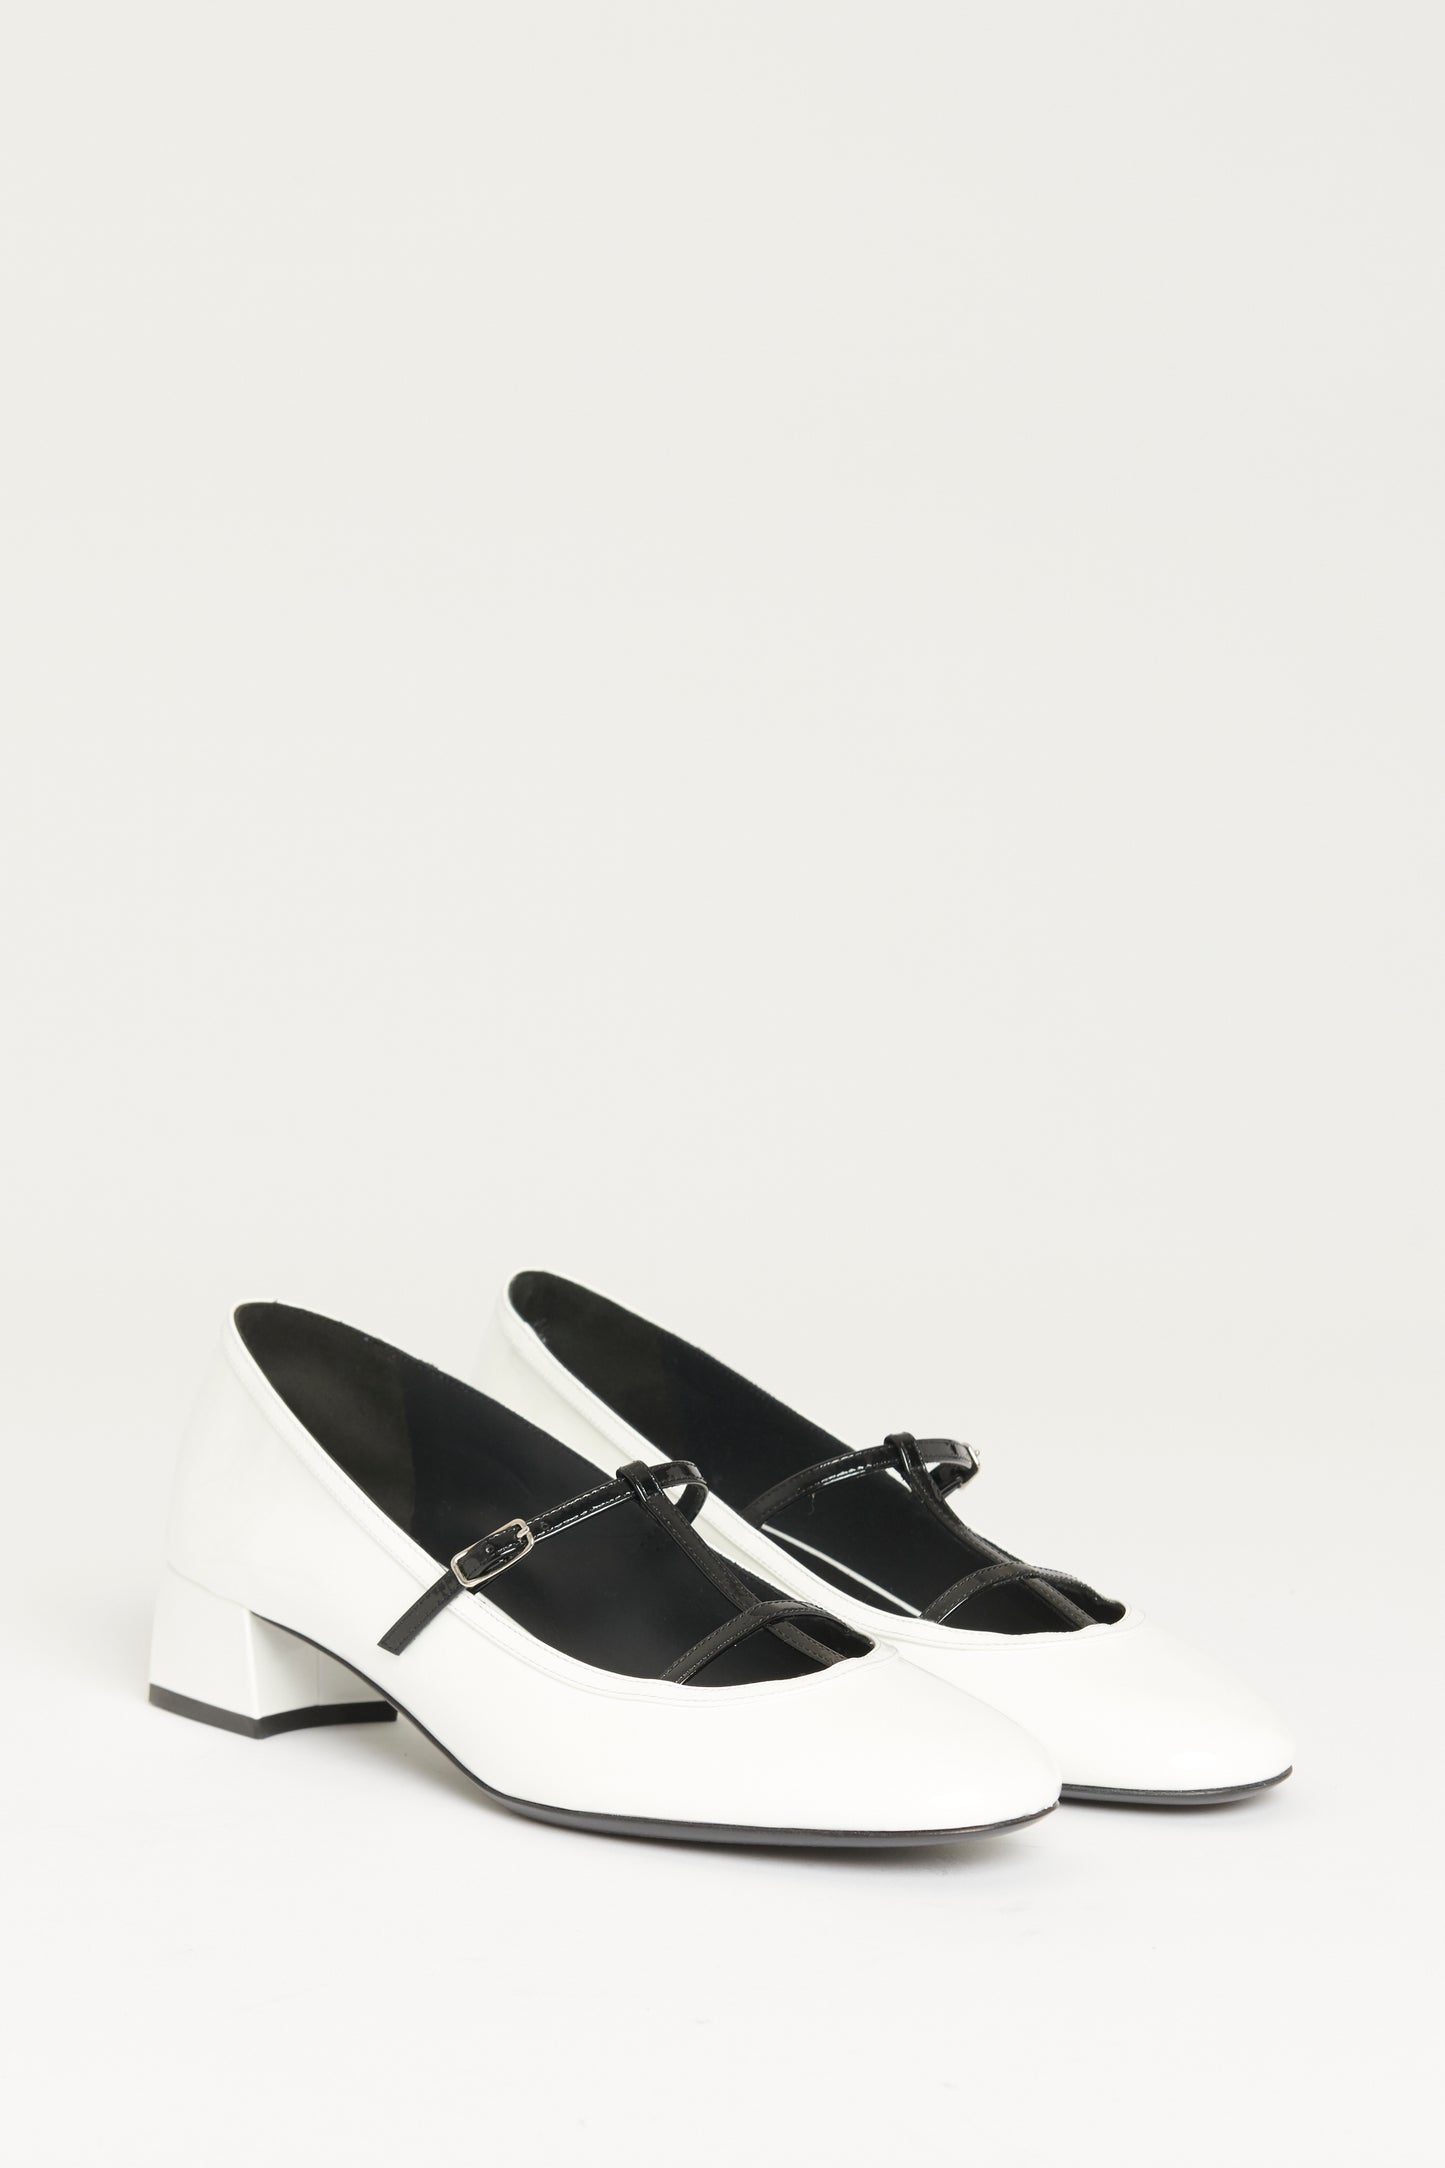 White & Black Patent Leather Preowned Fawn Pumps